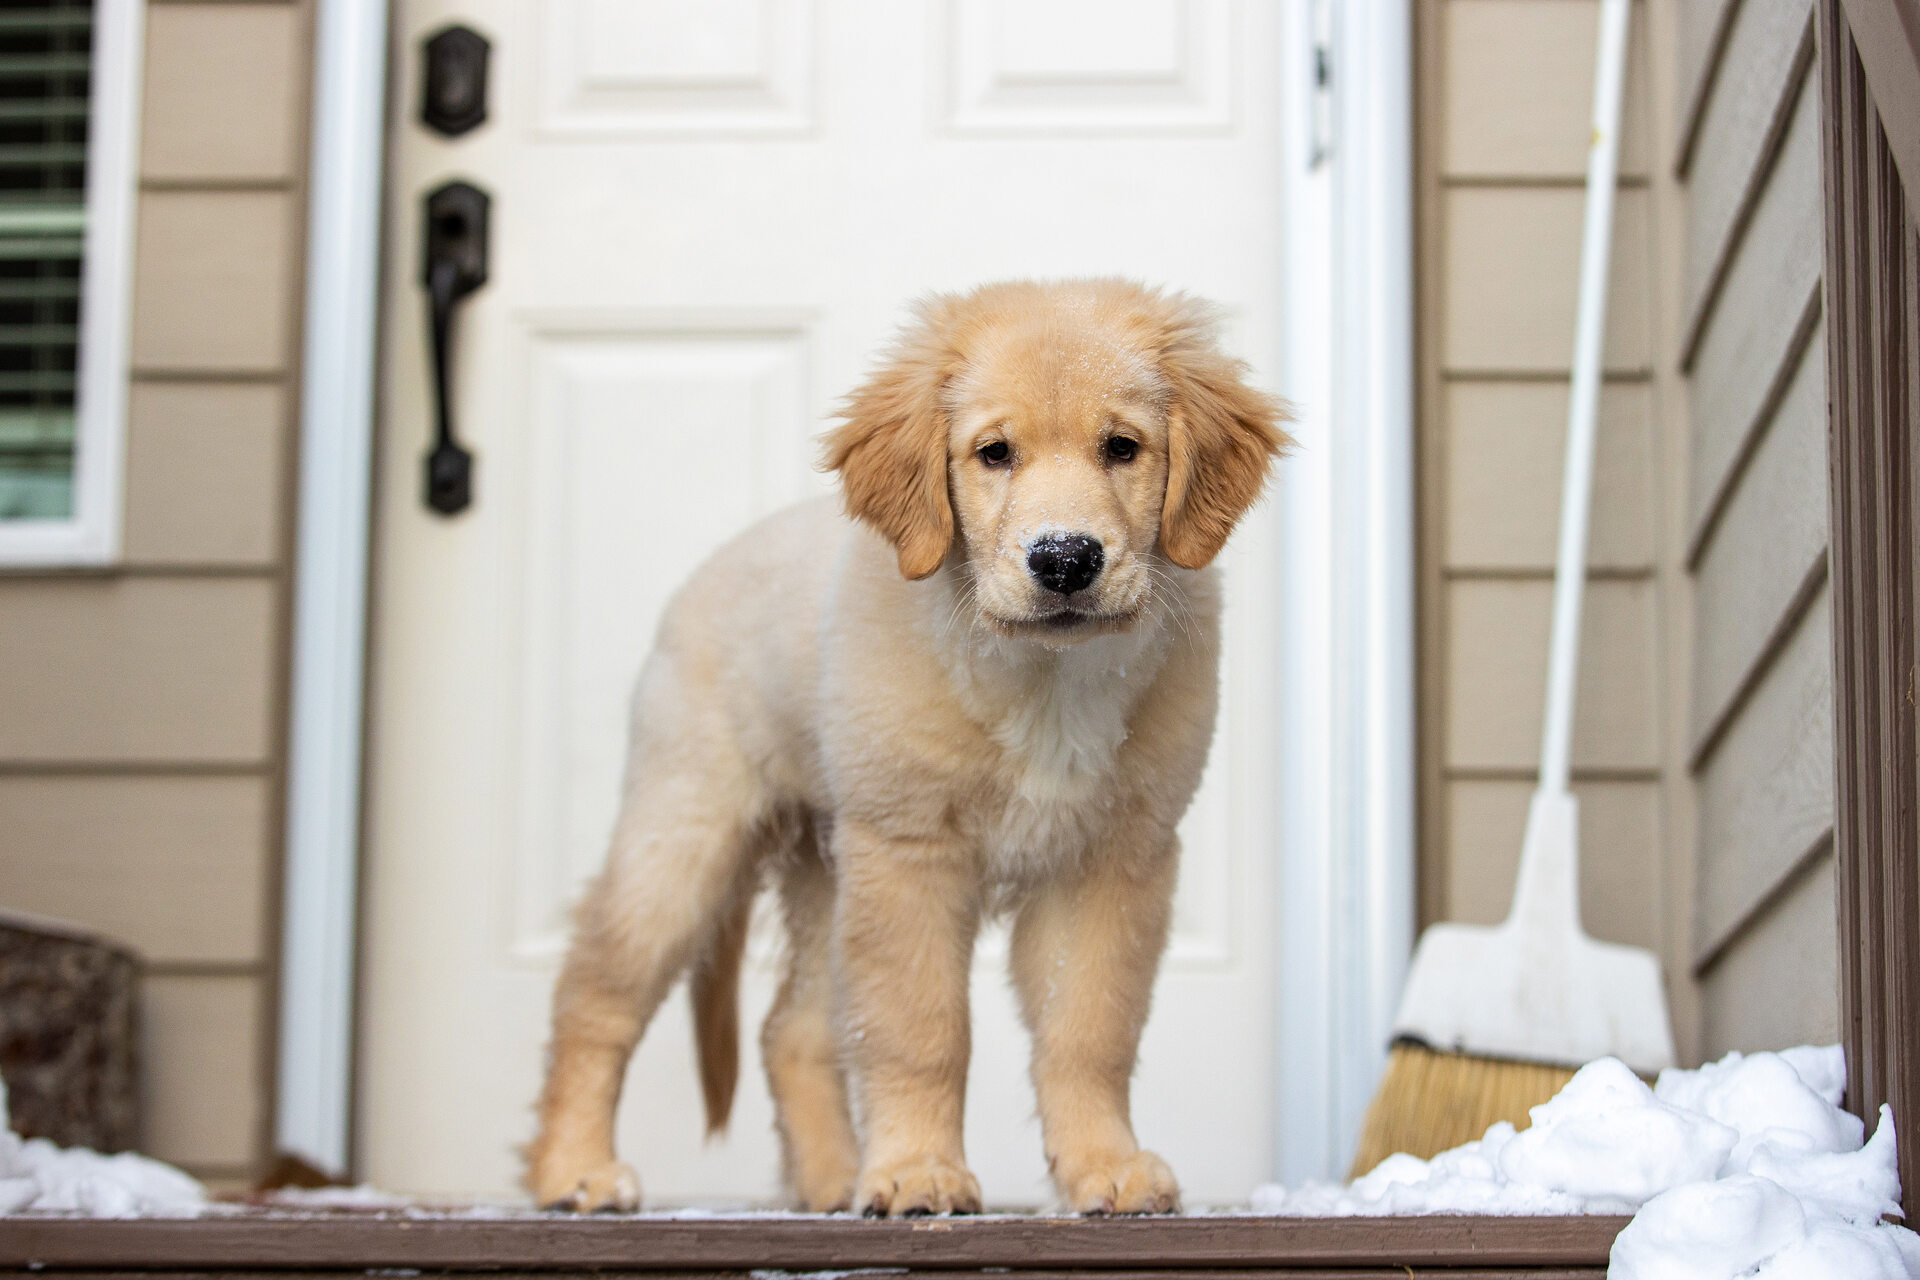 A puppy standing outdoors on a snowy porch